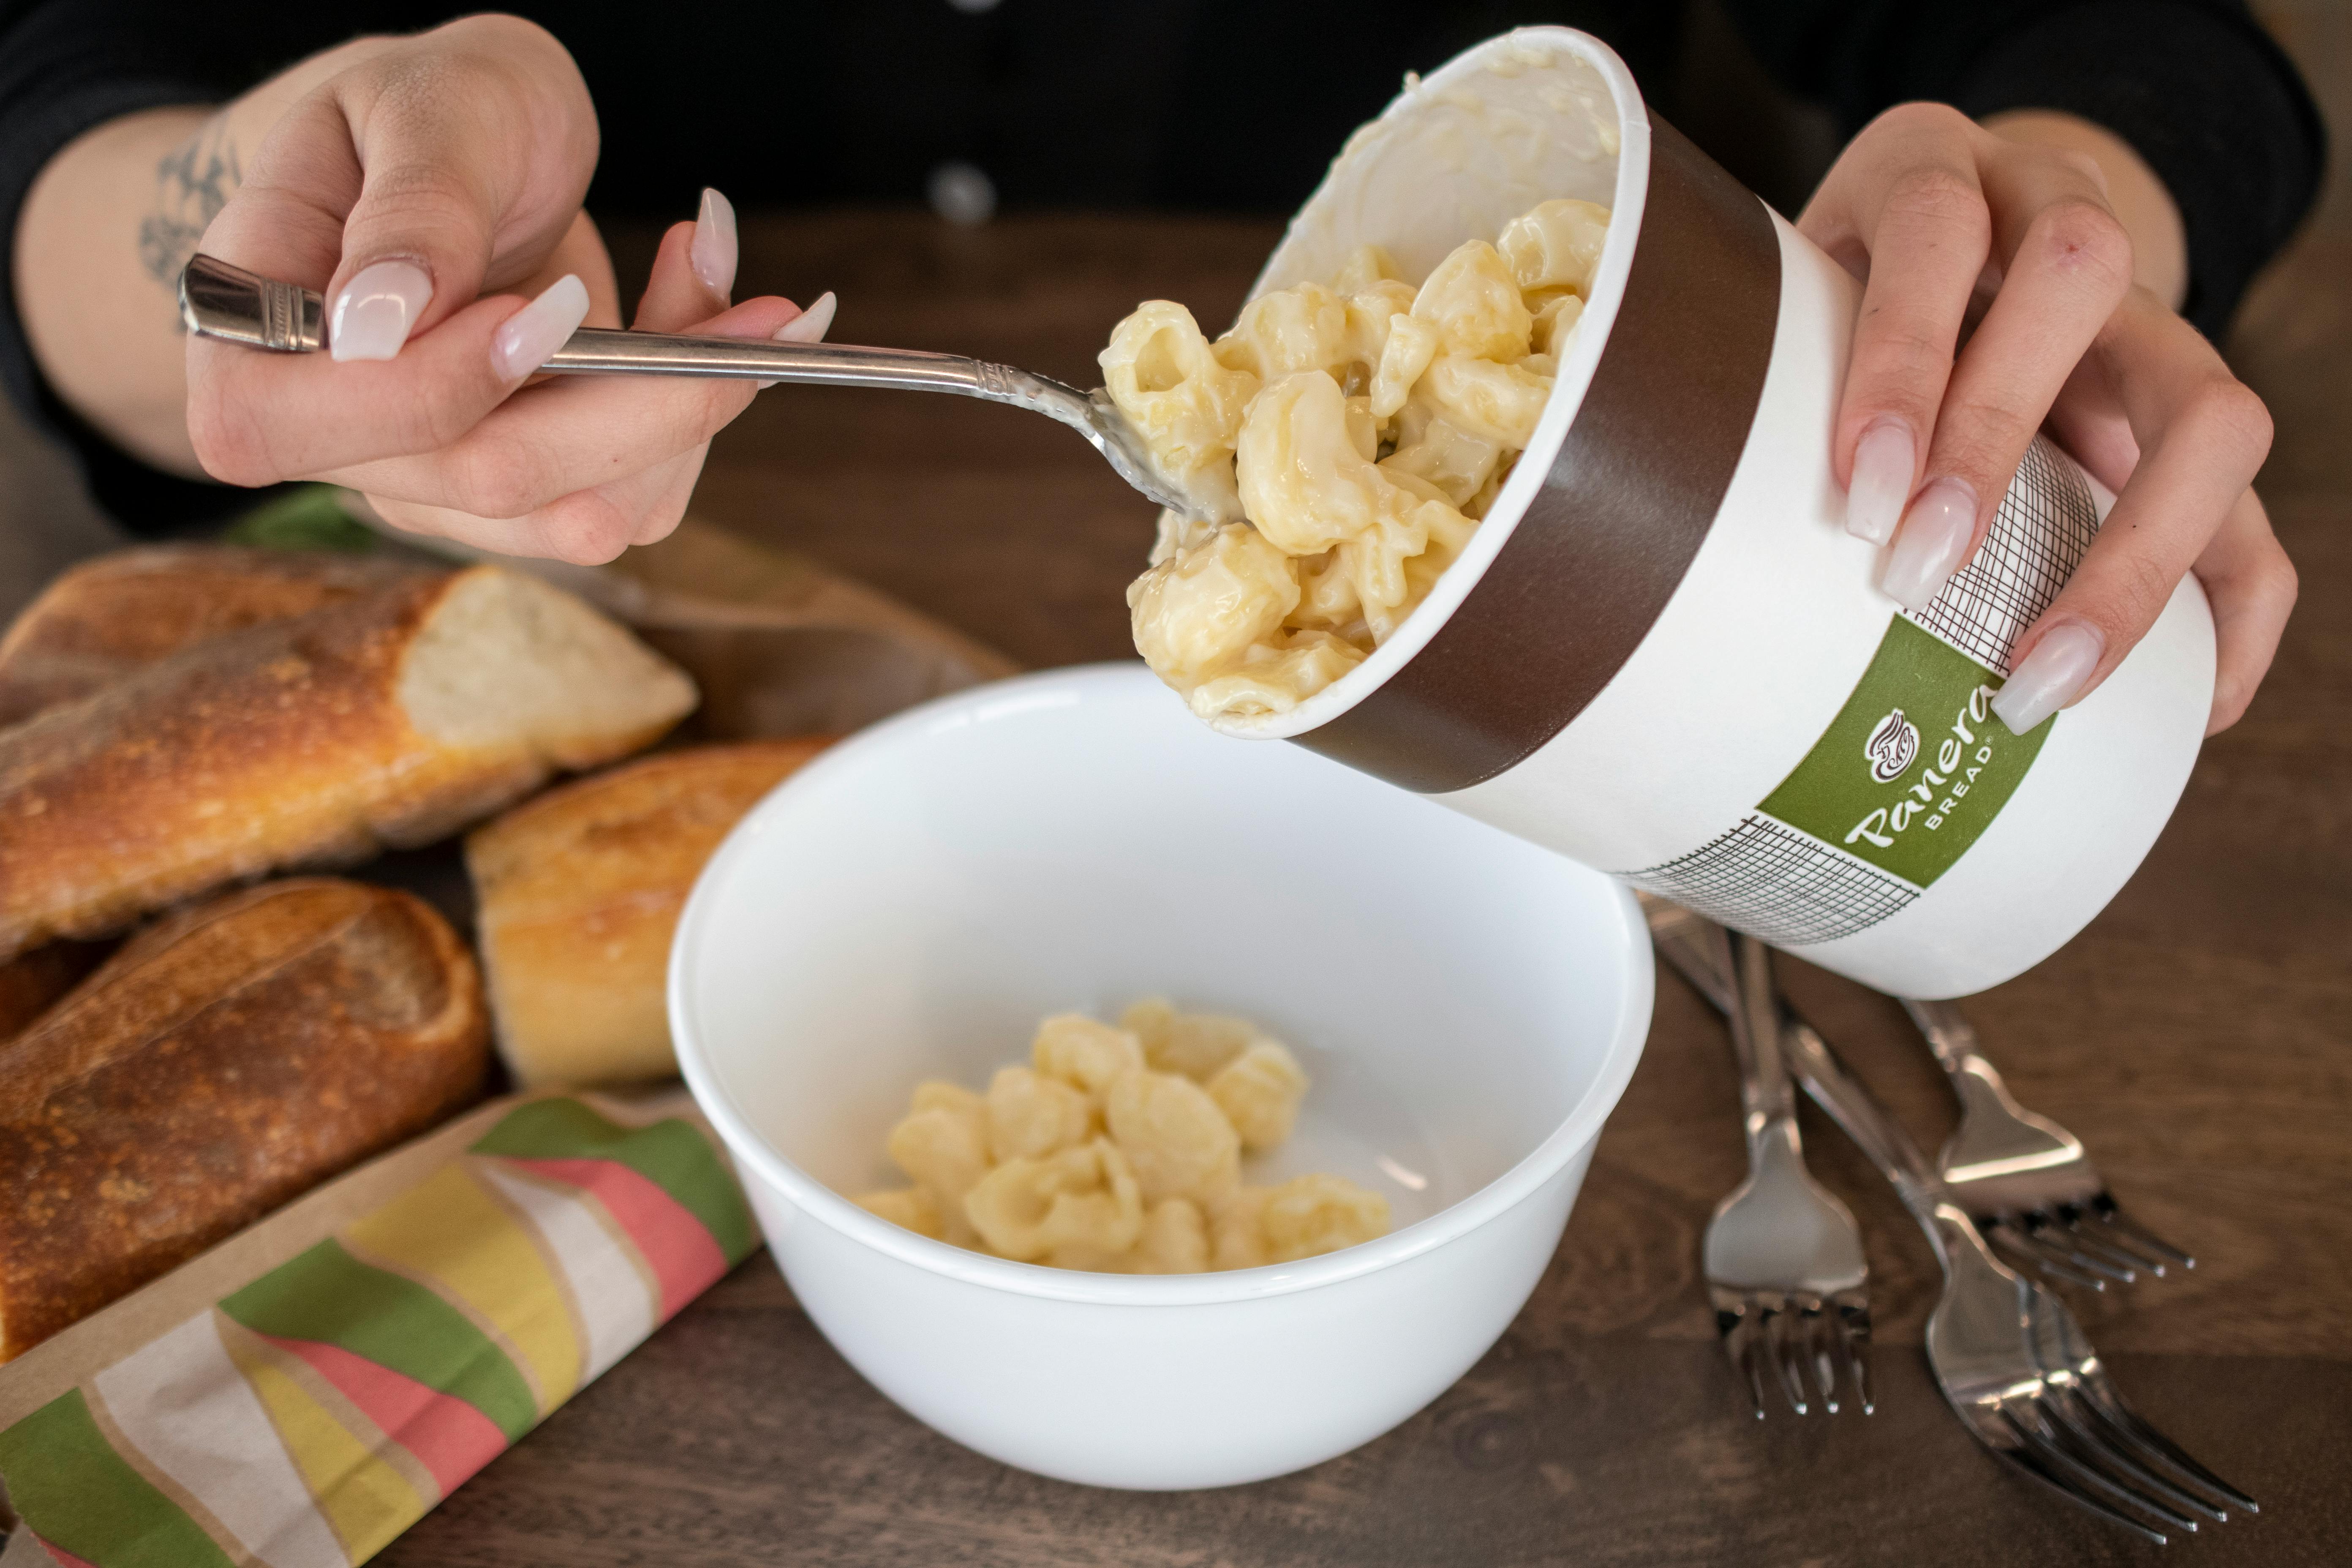 Mac n' cheese being poured into a bowl.